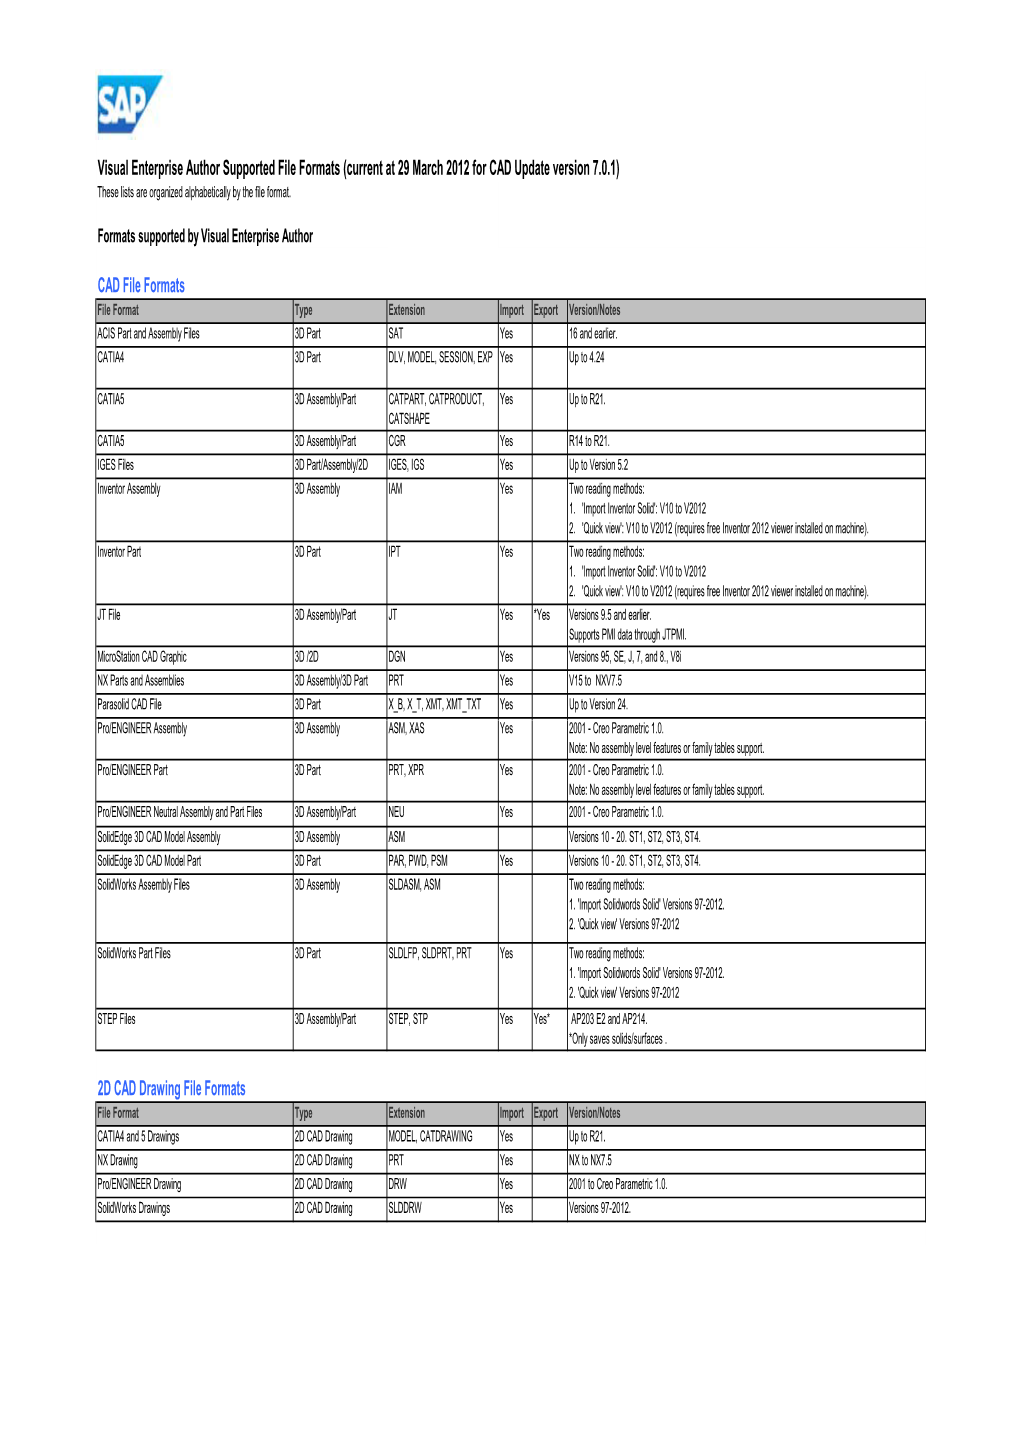 Visual Enterprise Author Supported File Formats (Current at 29 March 2012 for CAD Update Version 7.0.1) These Lists Are Organized Alphabetically by the File Format